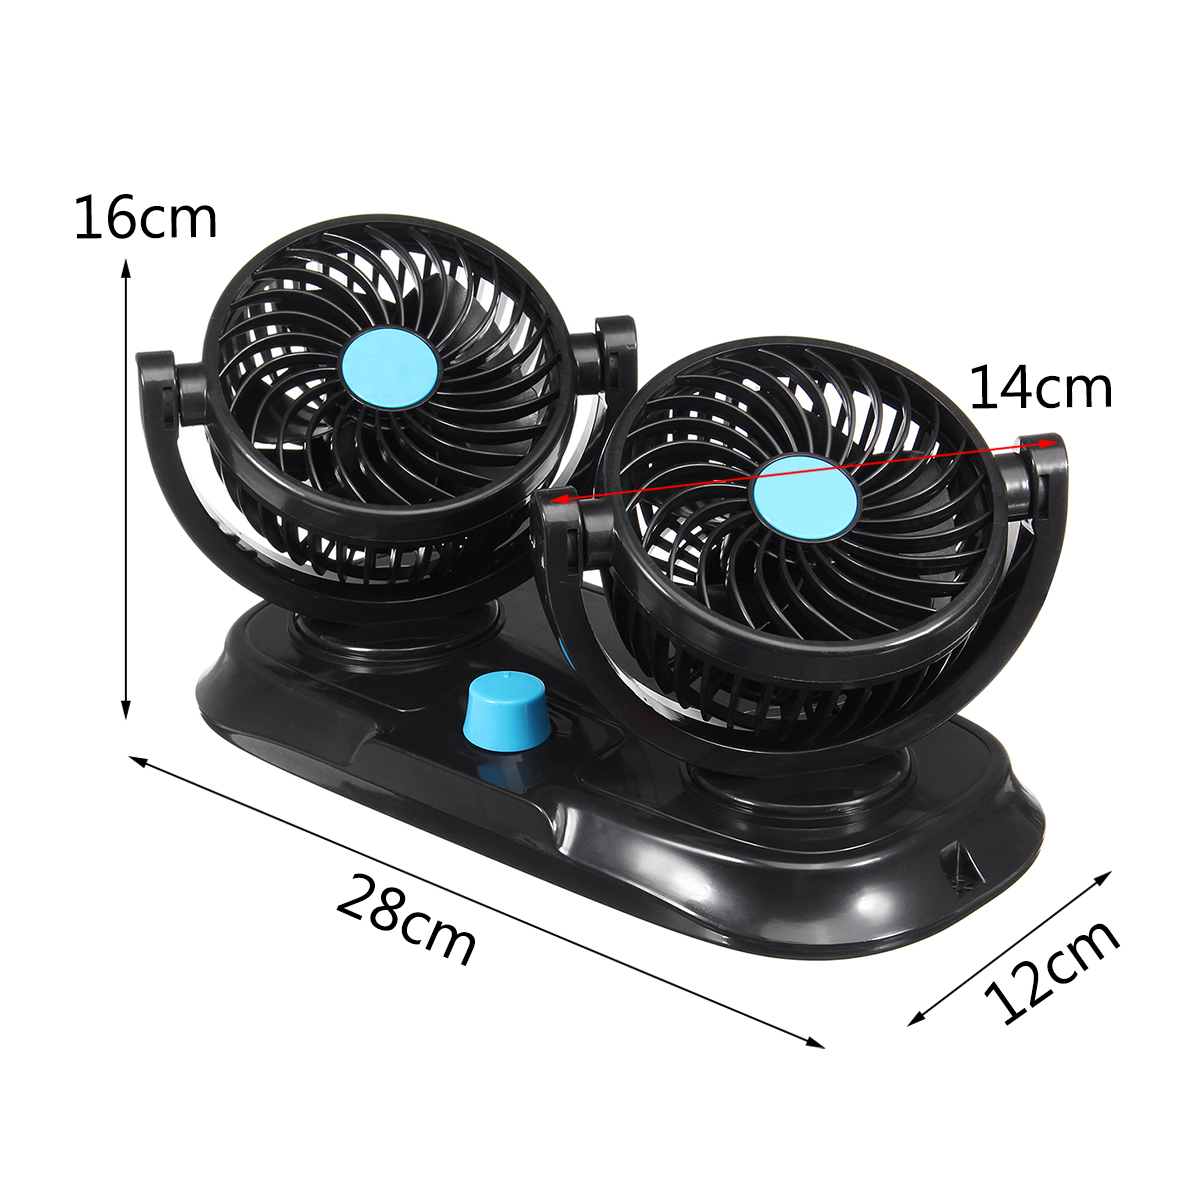 12V-Adjustable-Double-360-Degrees-Mini-Oscillating-Fan-Rotation-Cooling-Fan-Air-Conditioner-1338437-10